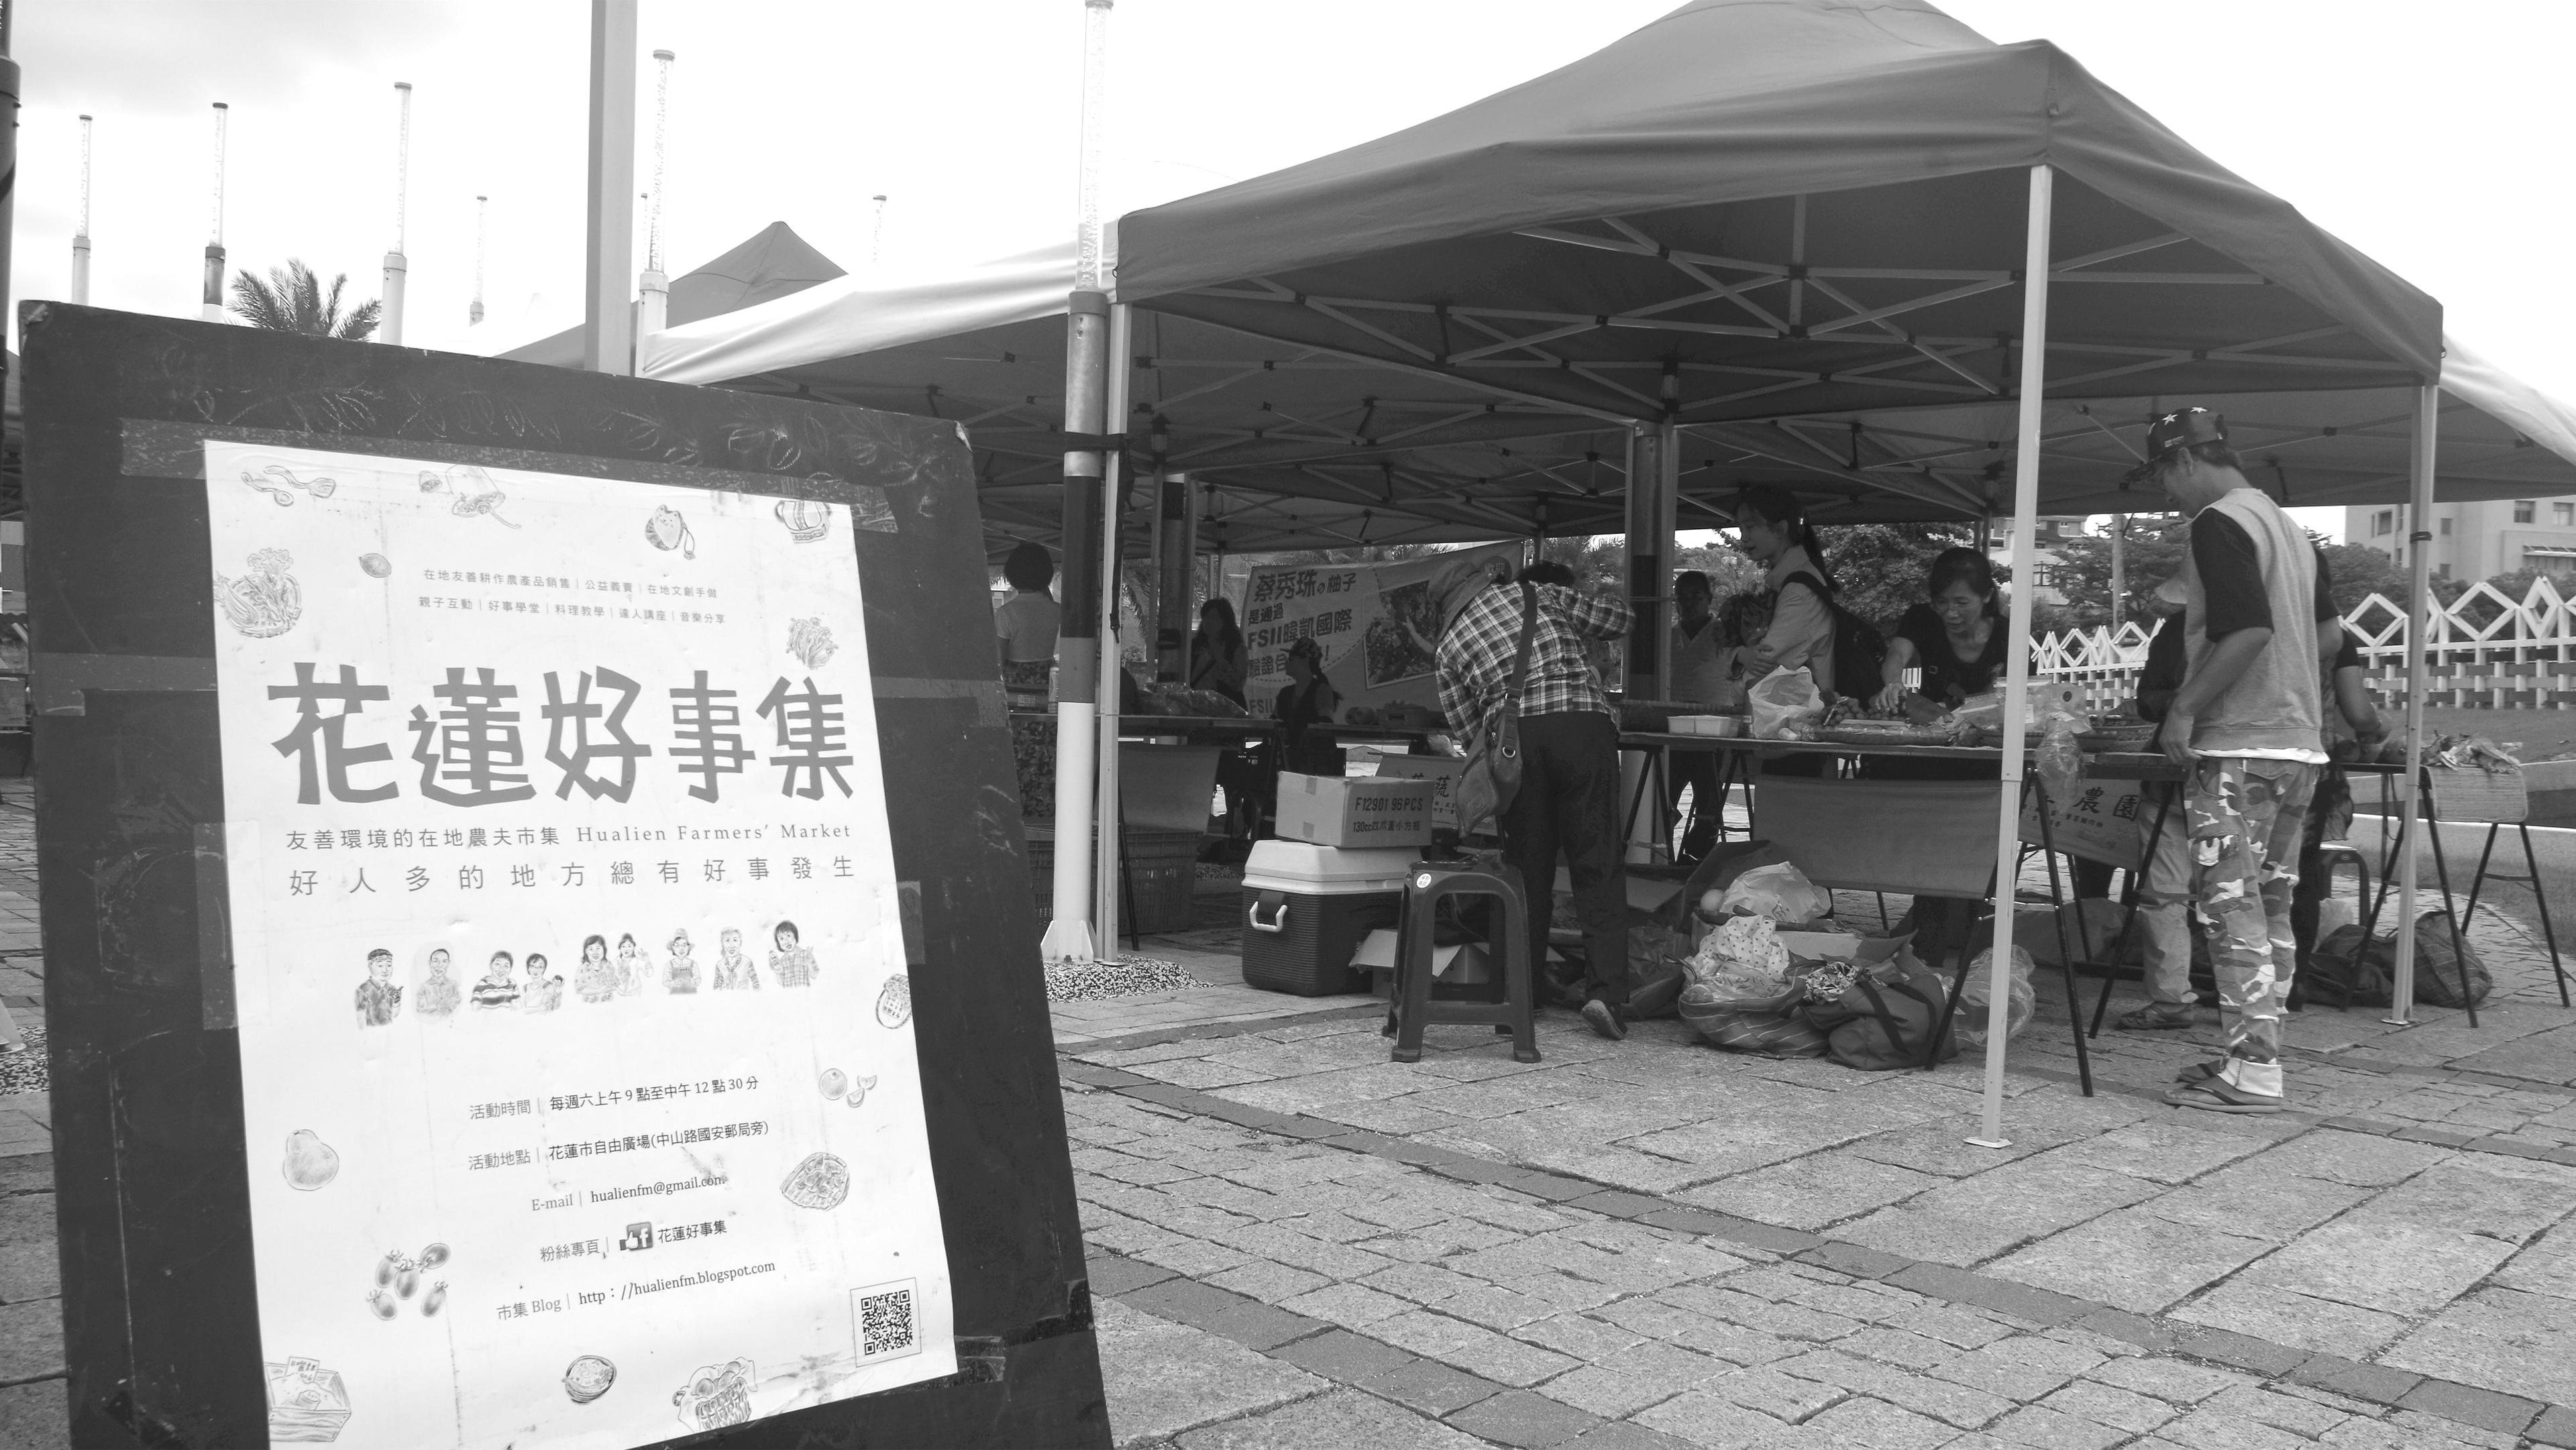 Cover image of this place 花蓮好事集 Hualien Farmers' Market